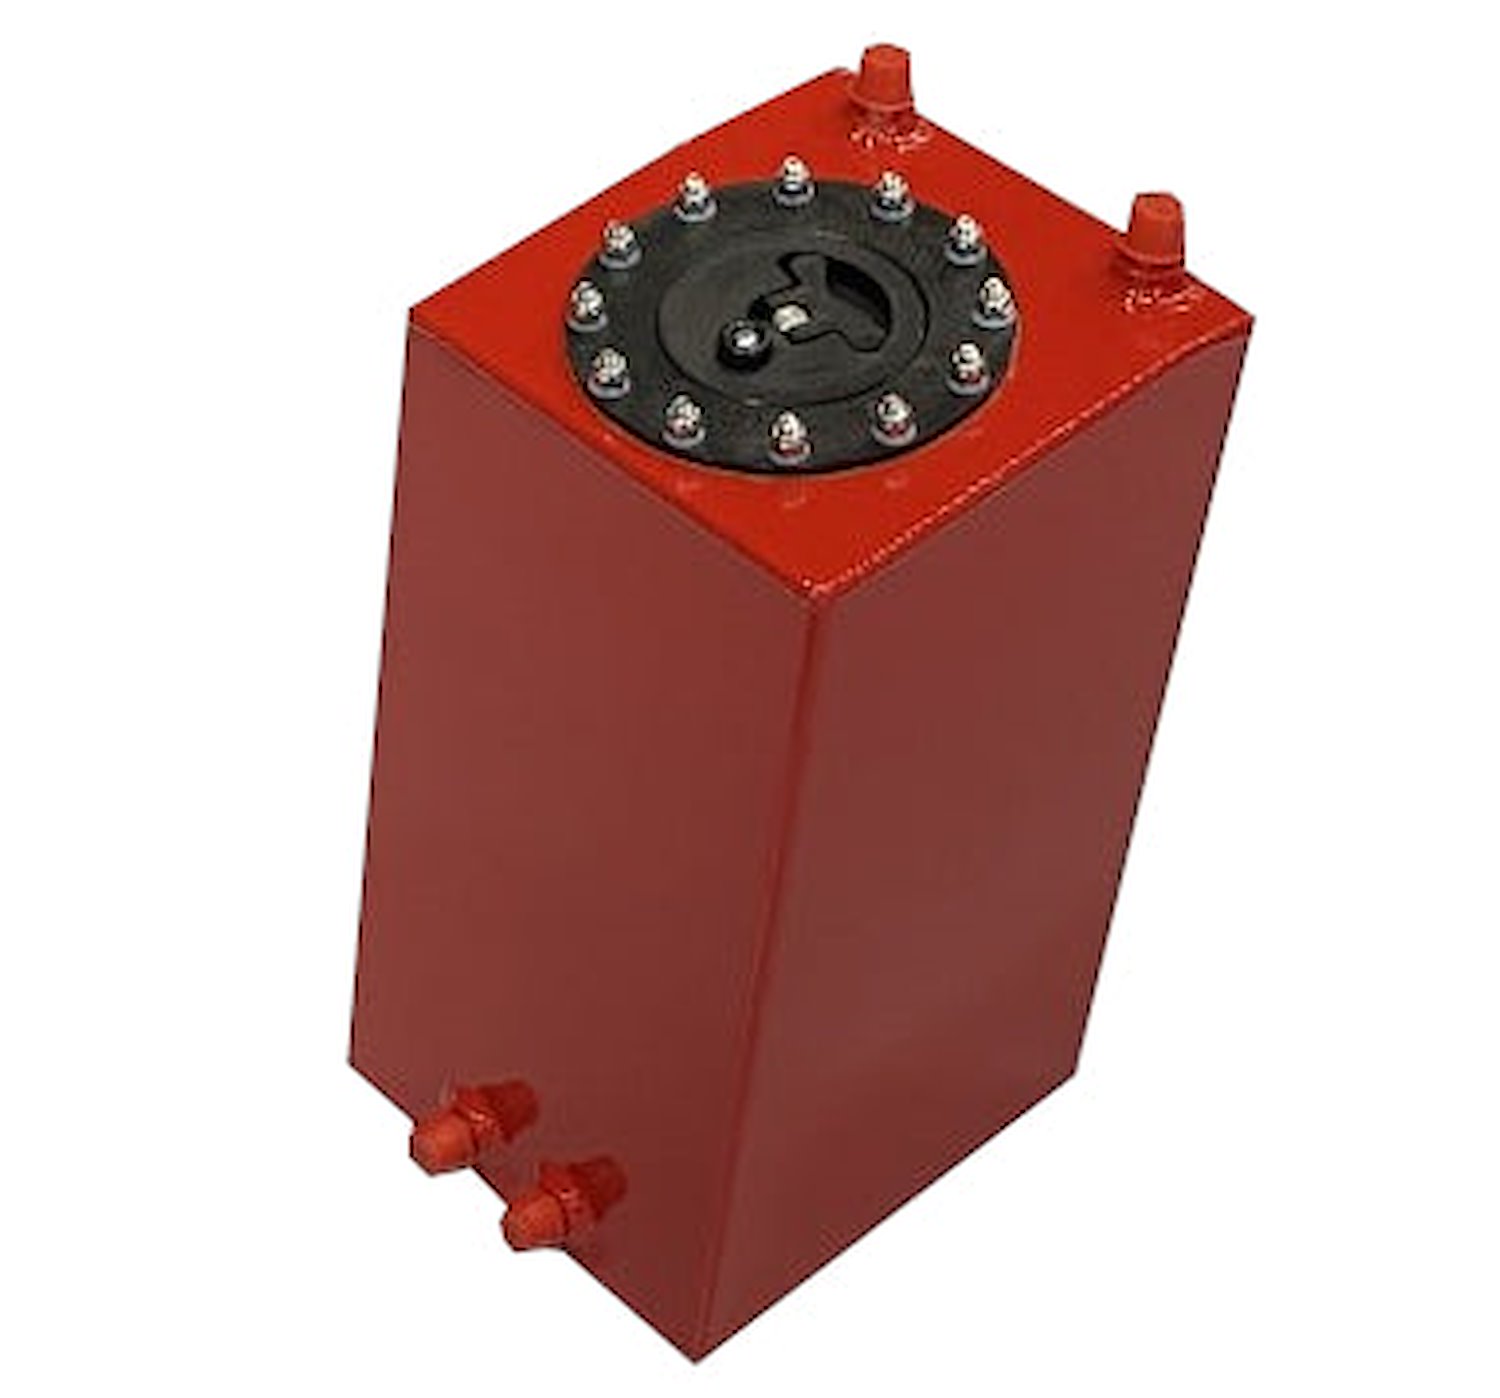 2030AB Aluminum Fuel Cell, 3-Gallon, Red Powder Coated